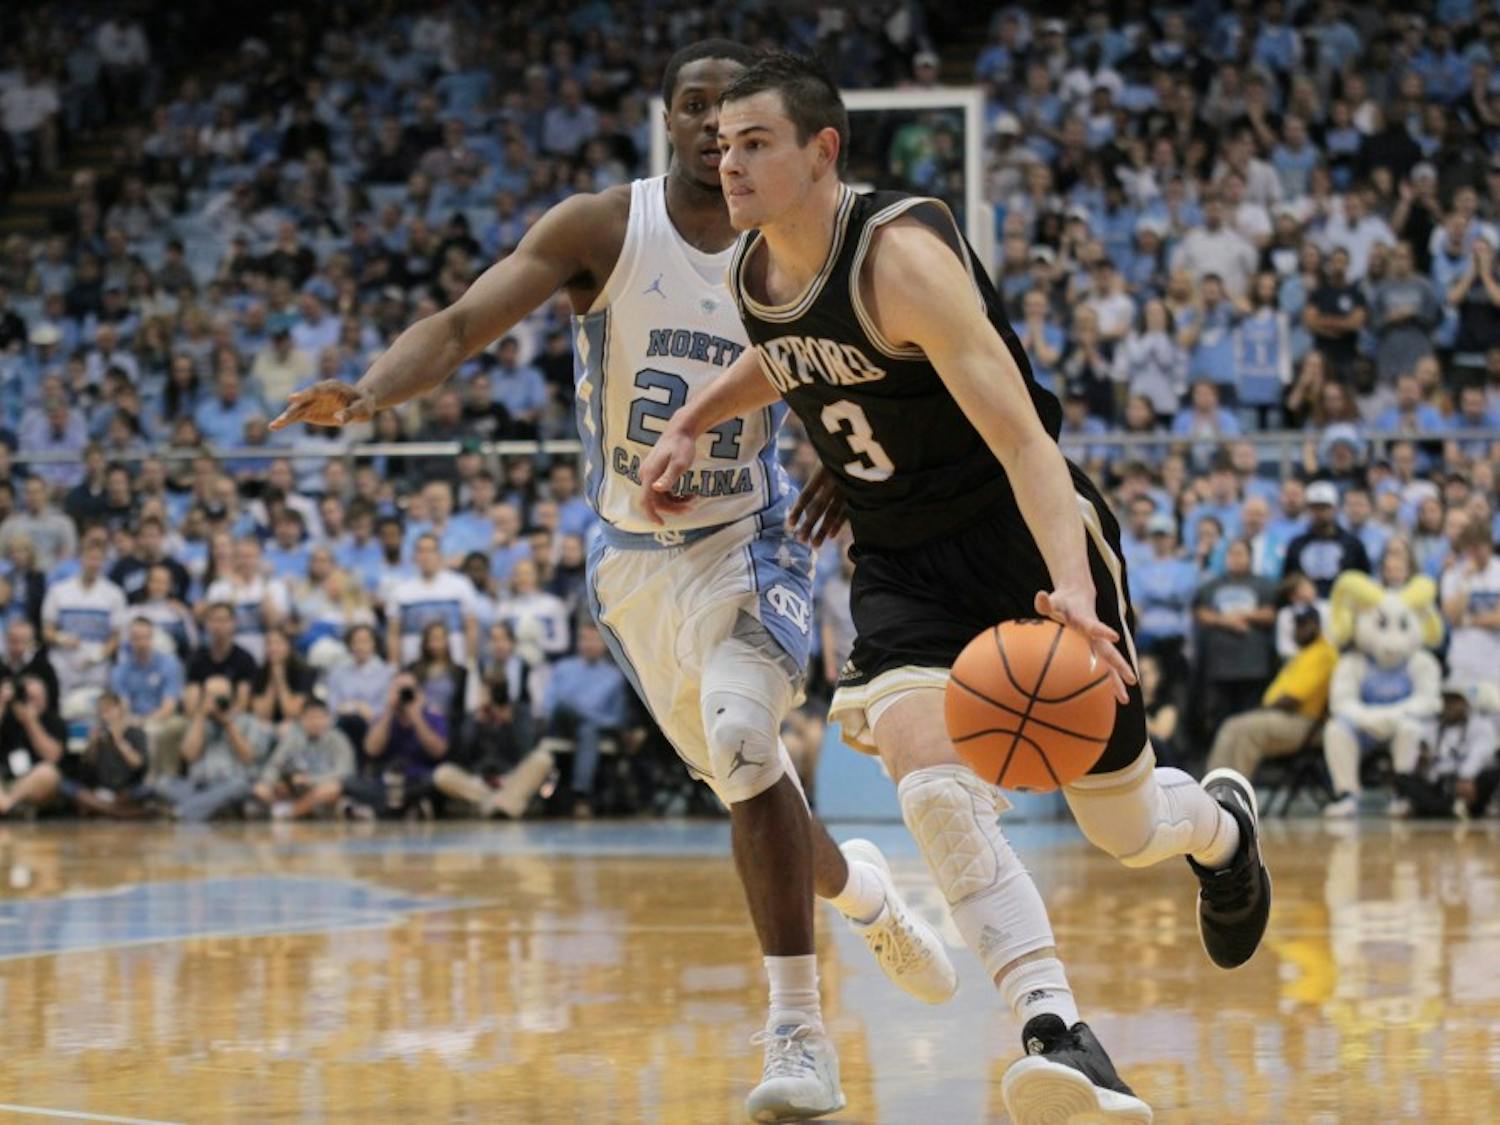 Wofford guard Fletcher Magee (3) drives past North Carolina guard Kenny Williams (24) on Dec. 20 in the Smith Center.